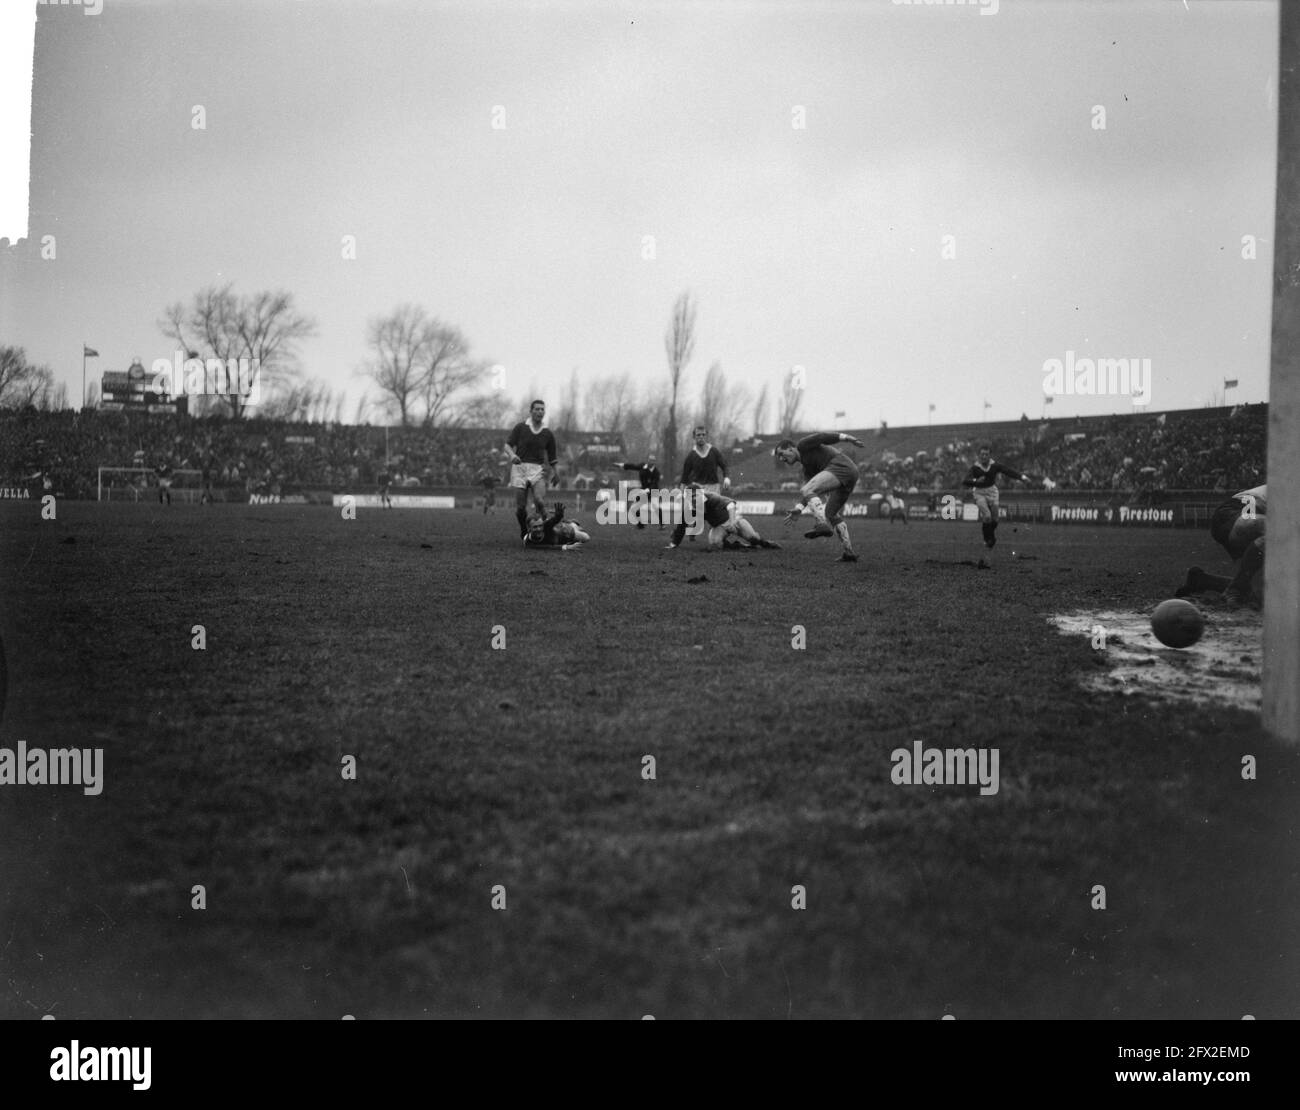 Nec against Ajax 1-3 (KNVB cup); game moments, 12 October 1975, sport,  soccer, The Netherlands, 20th century press agency photo, news to remember,  documentary, historic photography 1945-1990, visual stories, human history  of